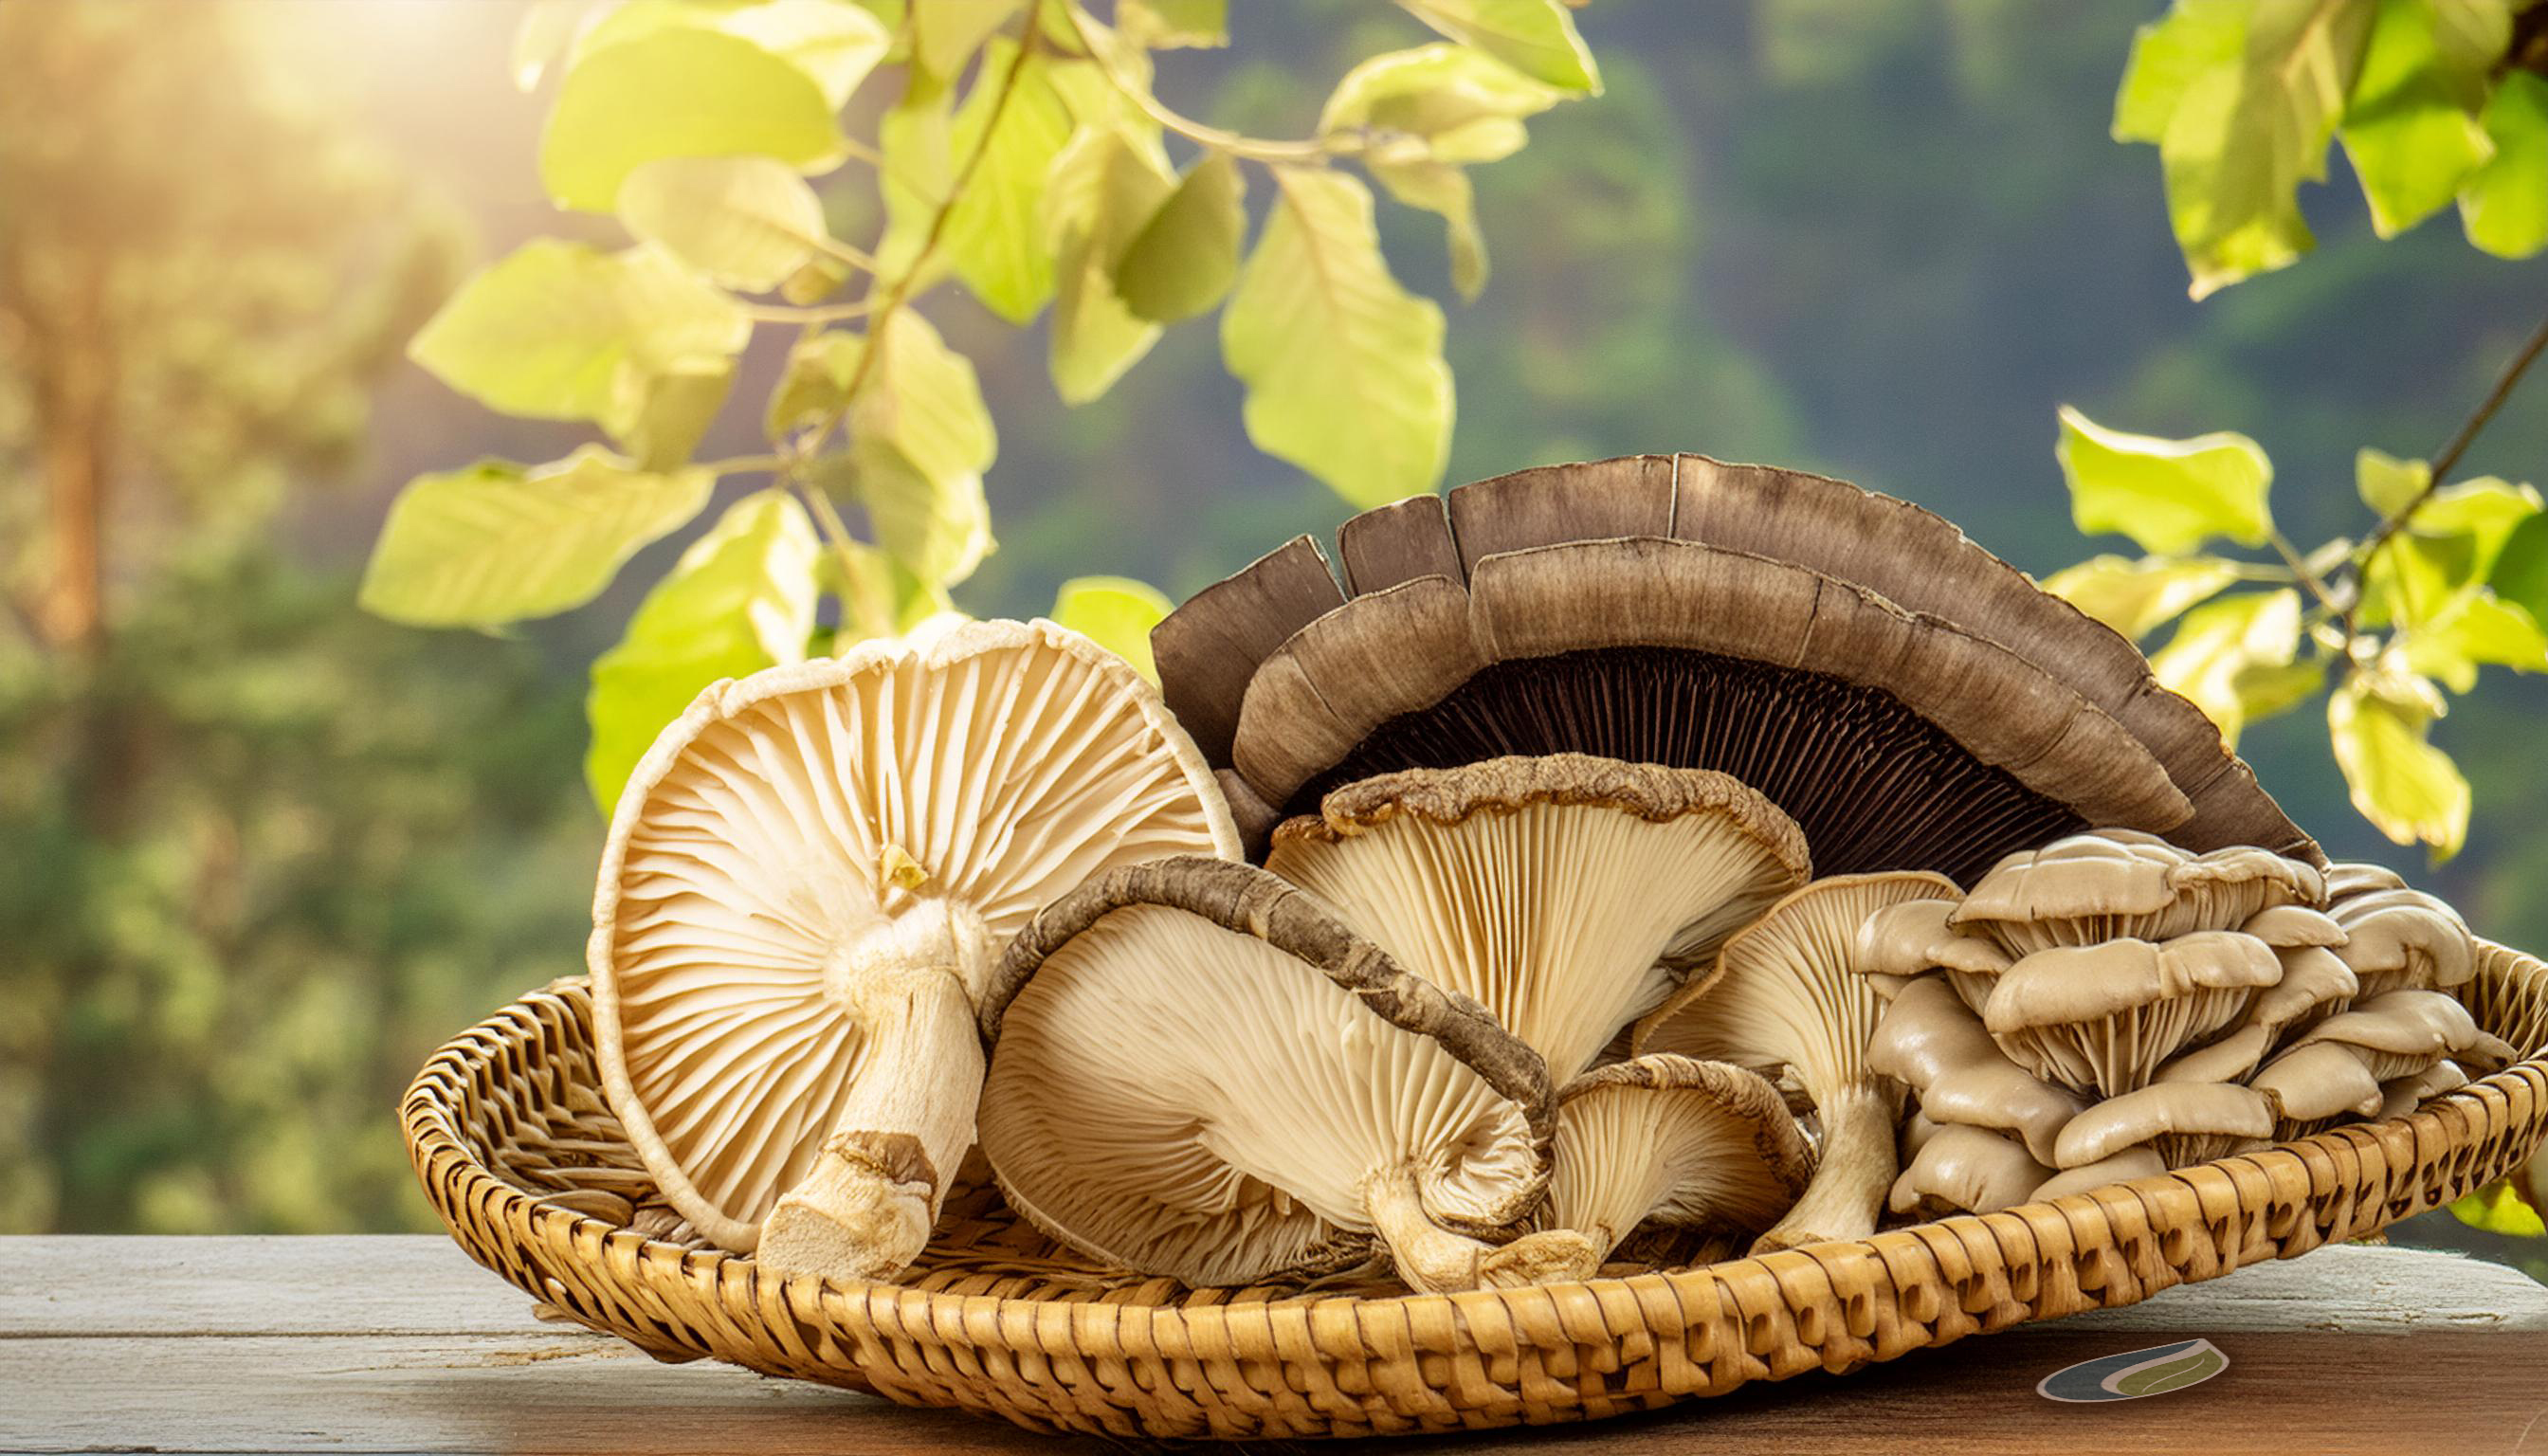  Discover the Benefits of Medicinal Mushrooms: An In-depth Guide